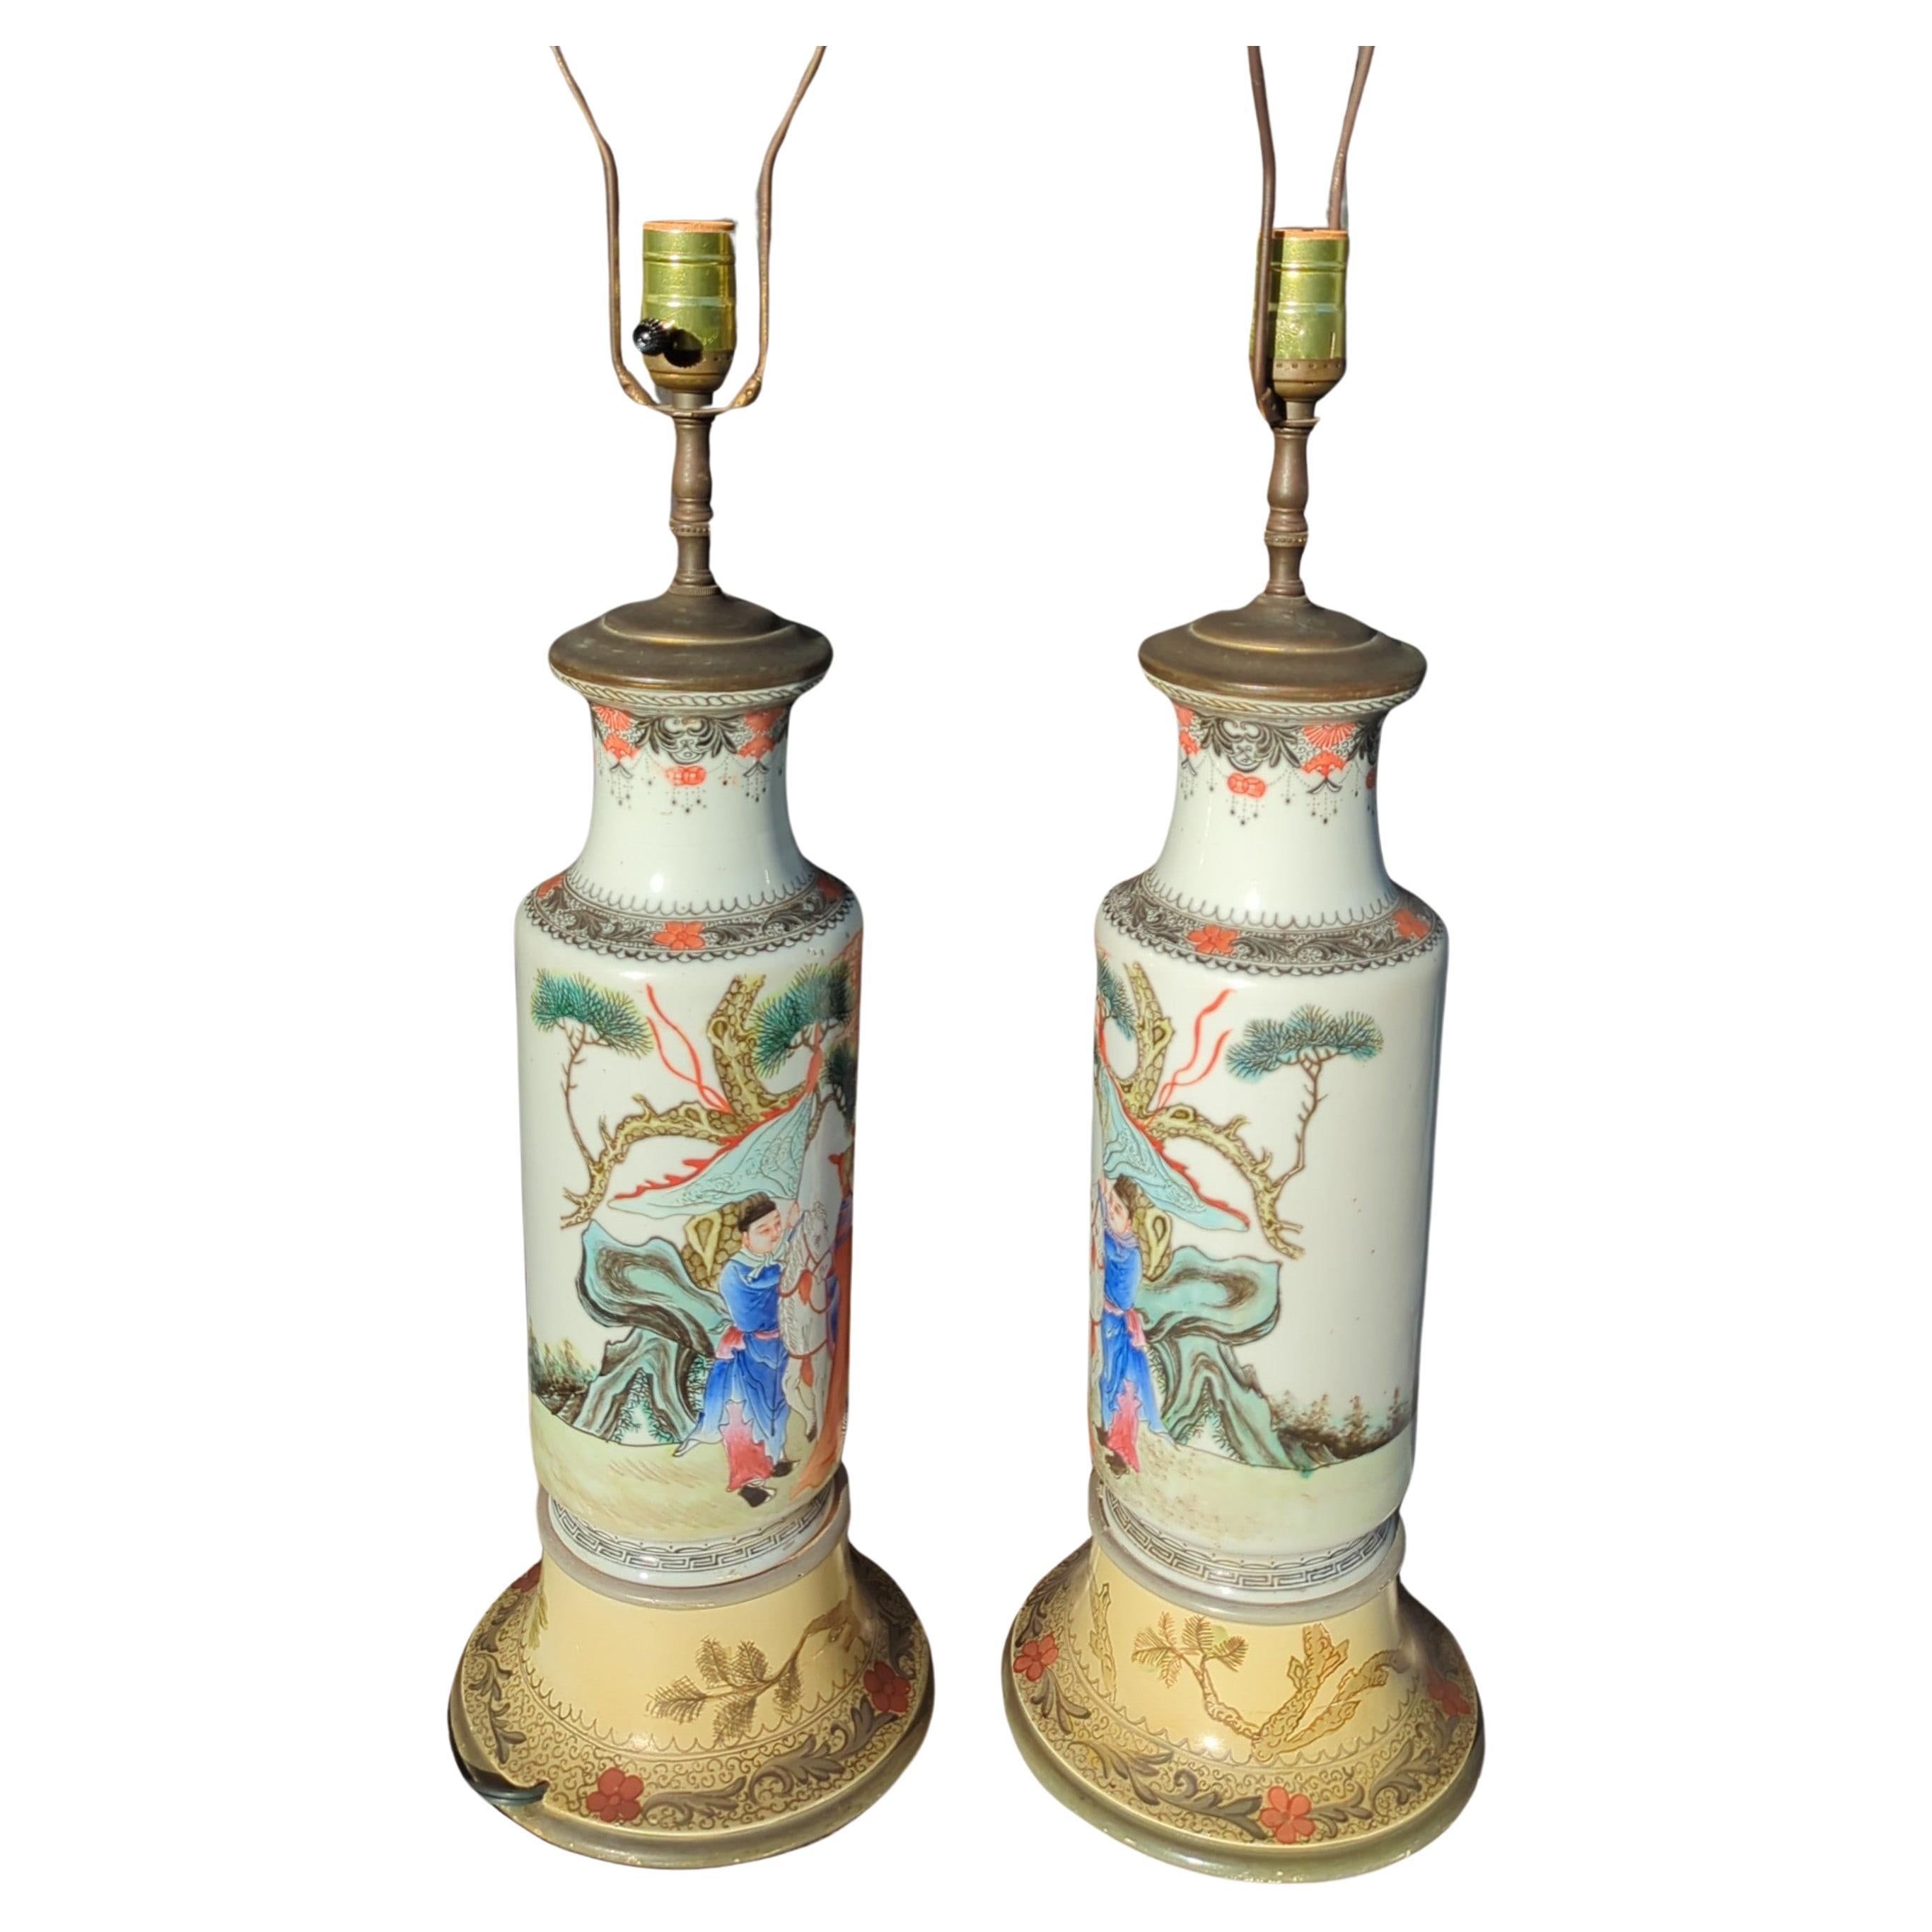 A matching mirror pair of antique Chinese early 20th century famille rose figural rouleau vase turned into lamps. The finely painted decorations depict a scene of a general looking up into the heaven, to gaze up on a group of floating fairies